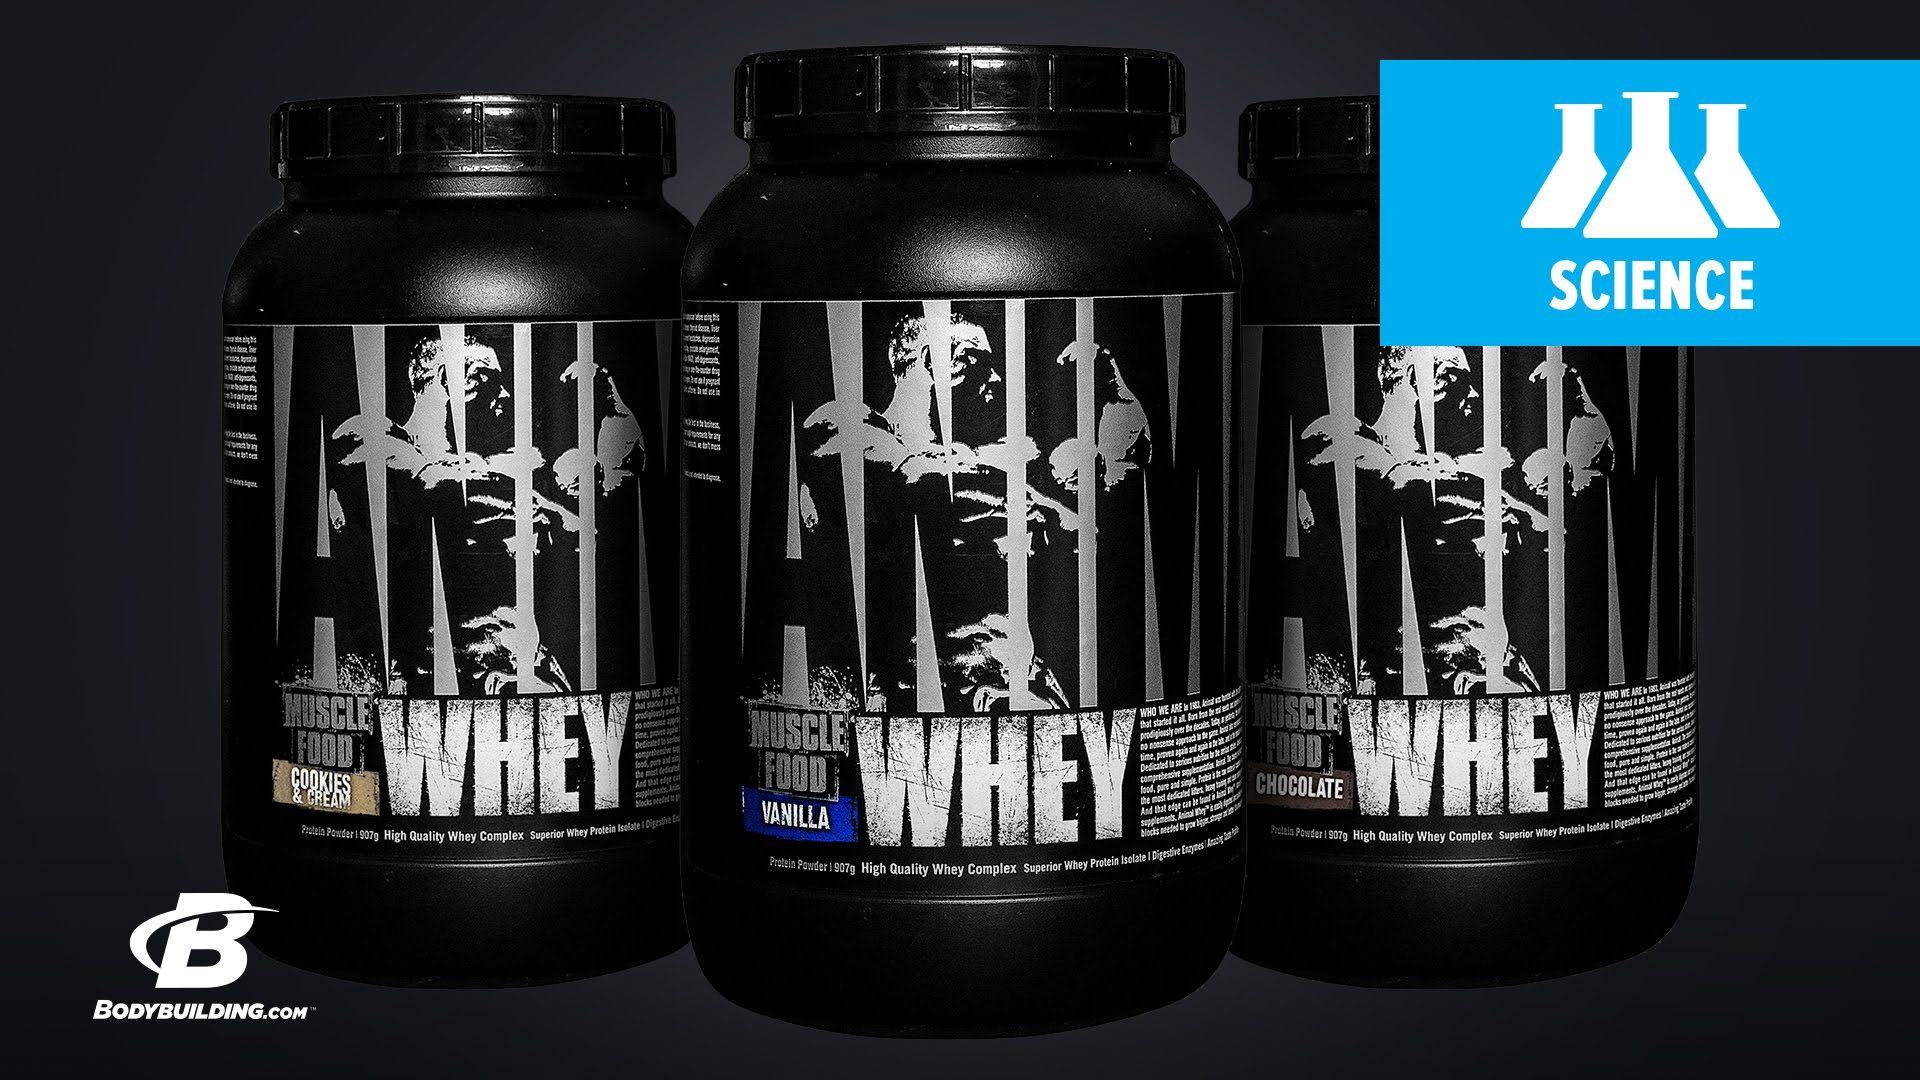 Universal Nutrition Animal Whey. Science Based Overview